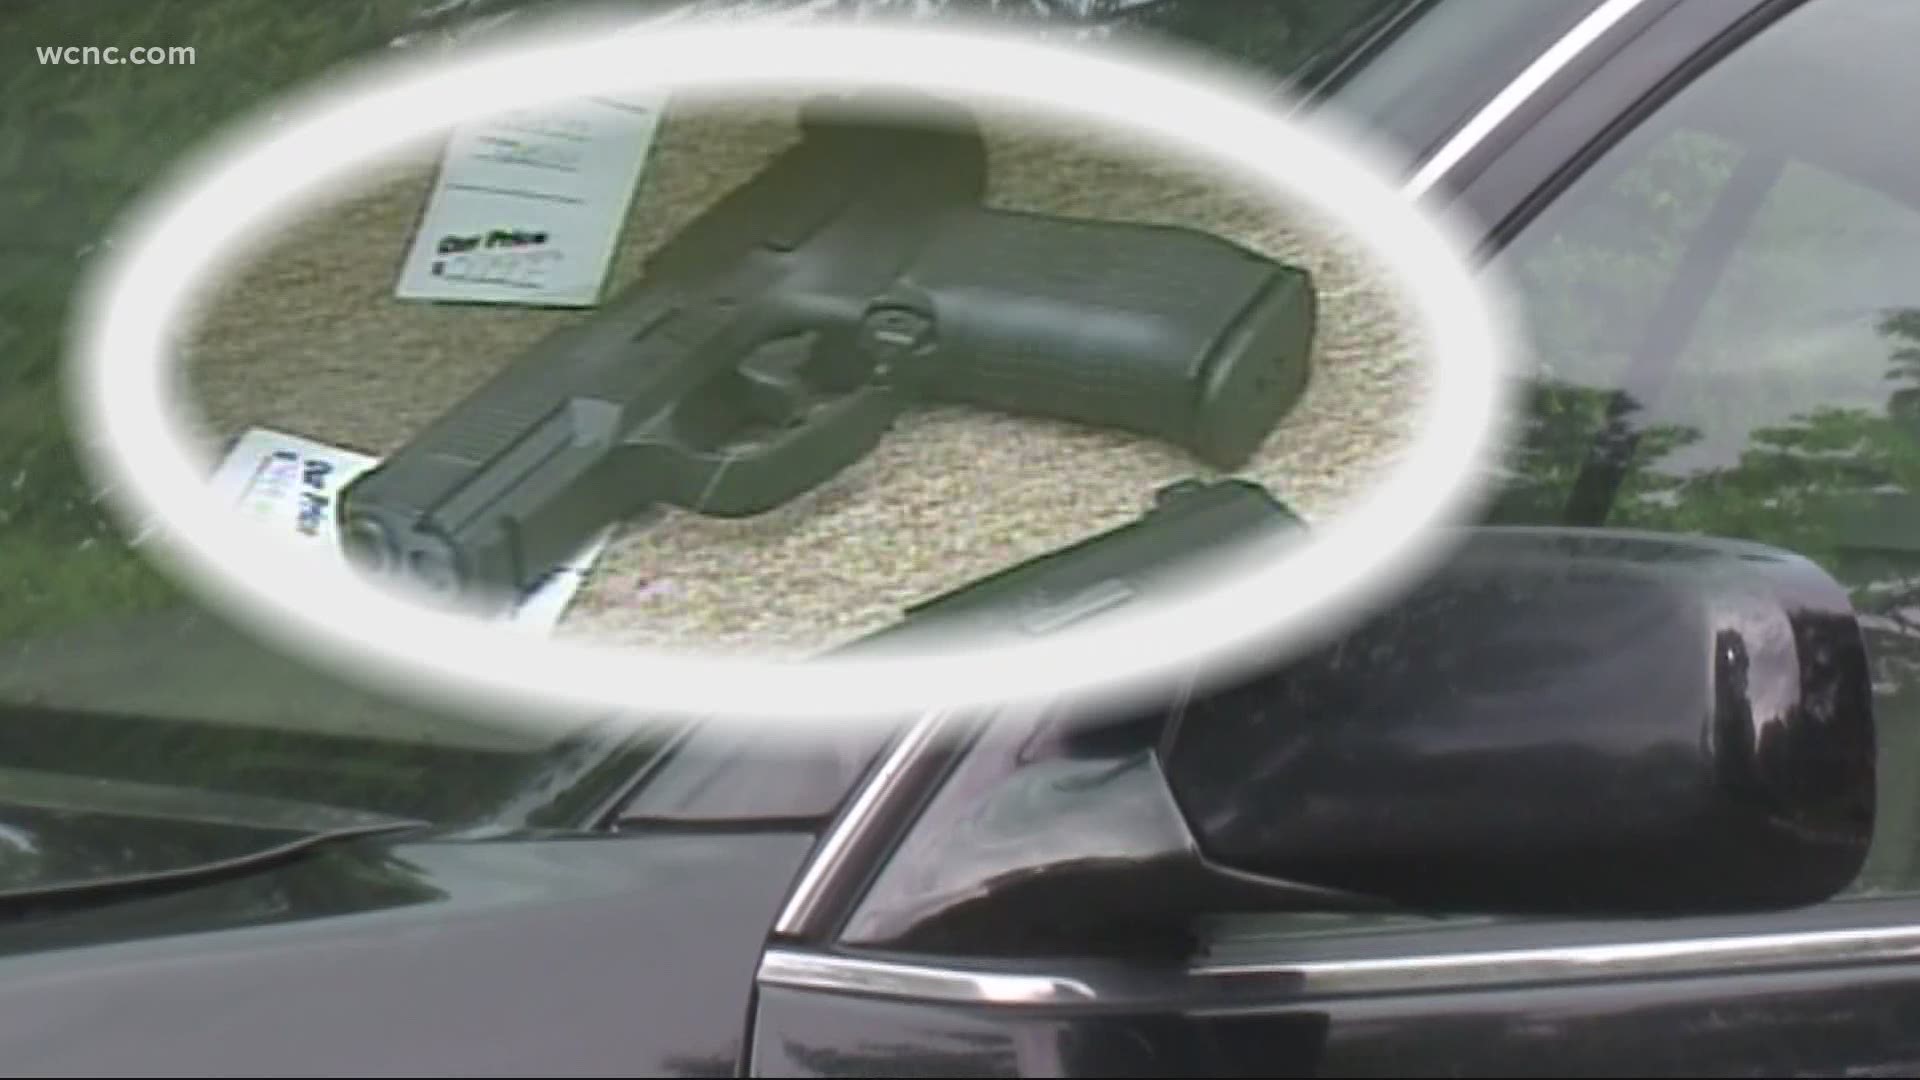 Police say thieves that steal guns have frequently used those guns in violent crimes.